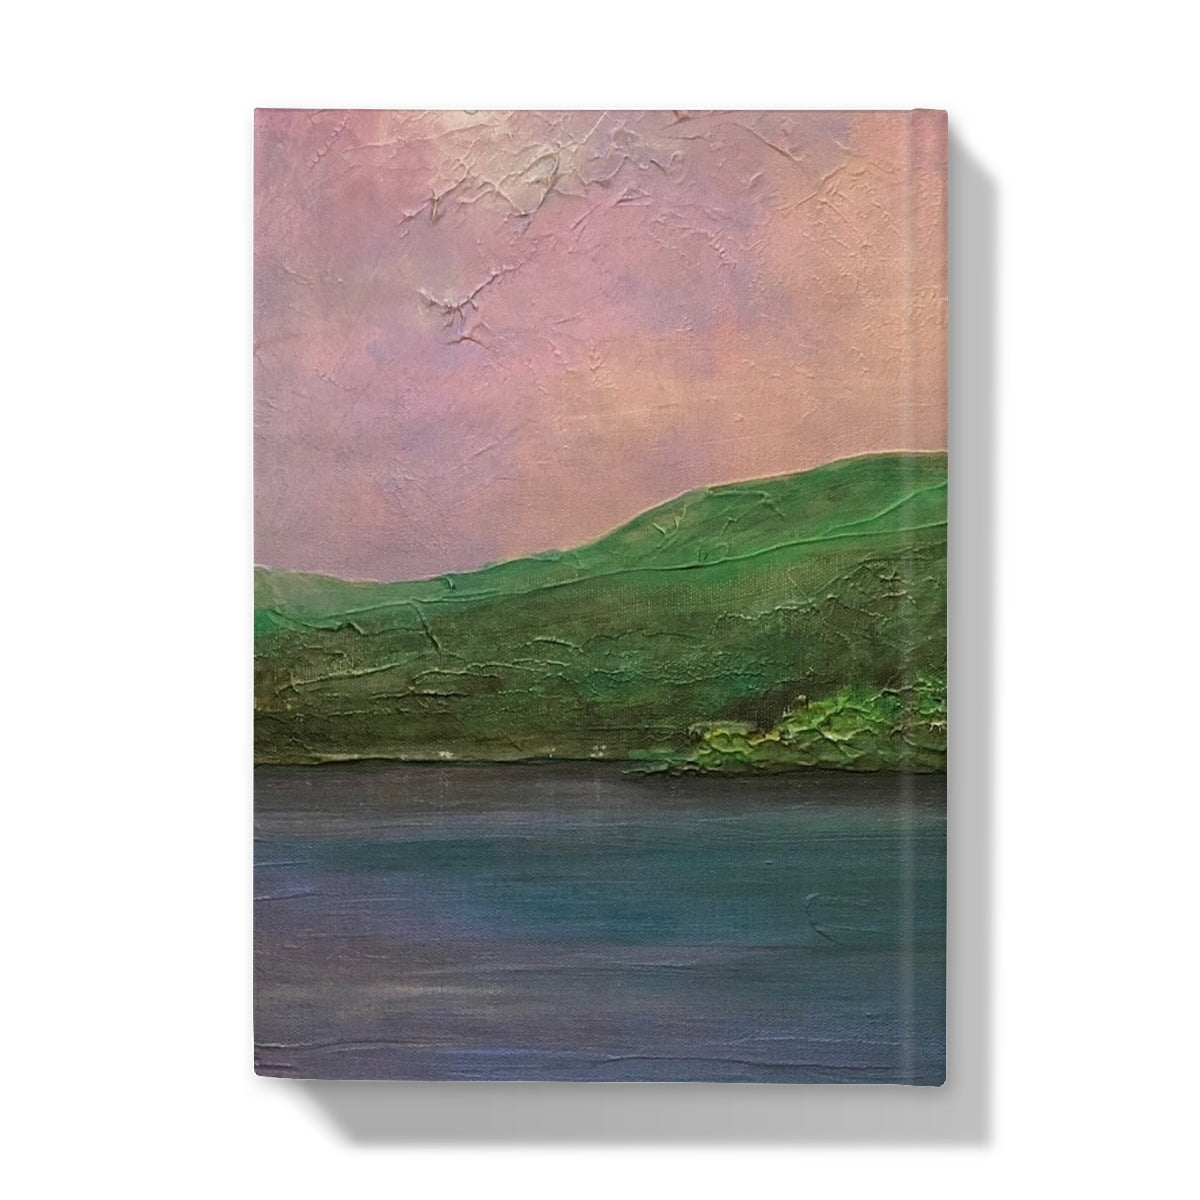 Old Castle Lachlan Art Gifts Hardback Journal-Journals & Notebooks-Historic & Iconic Scotland Art Gallery-Paintings, Prints, Homeware, Art Gifts From Scotland By Scottish Artist Kevin Hunter